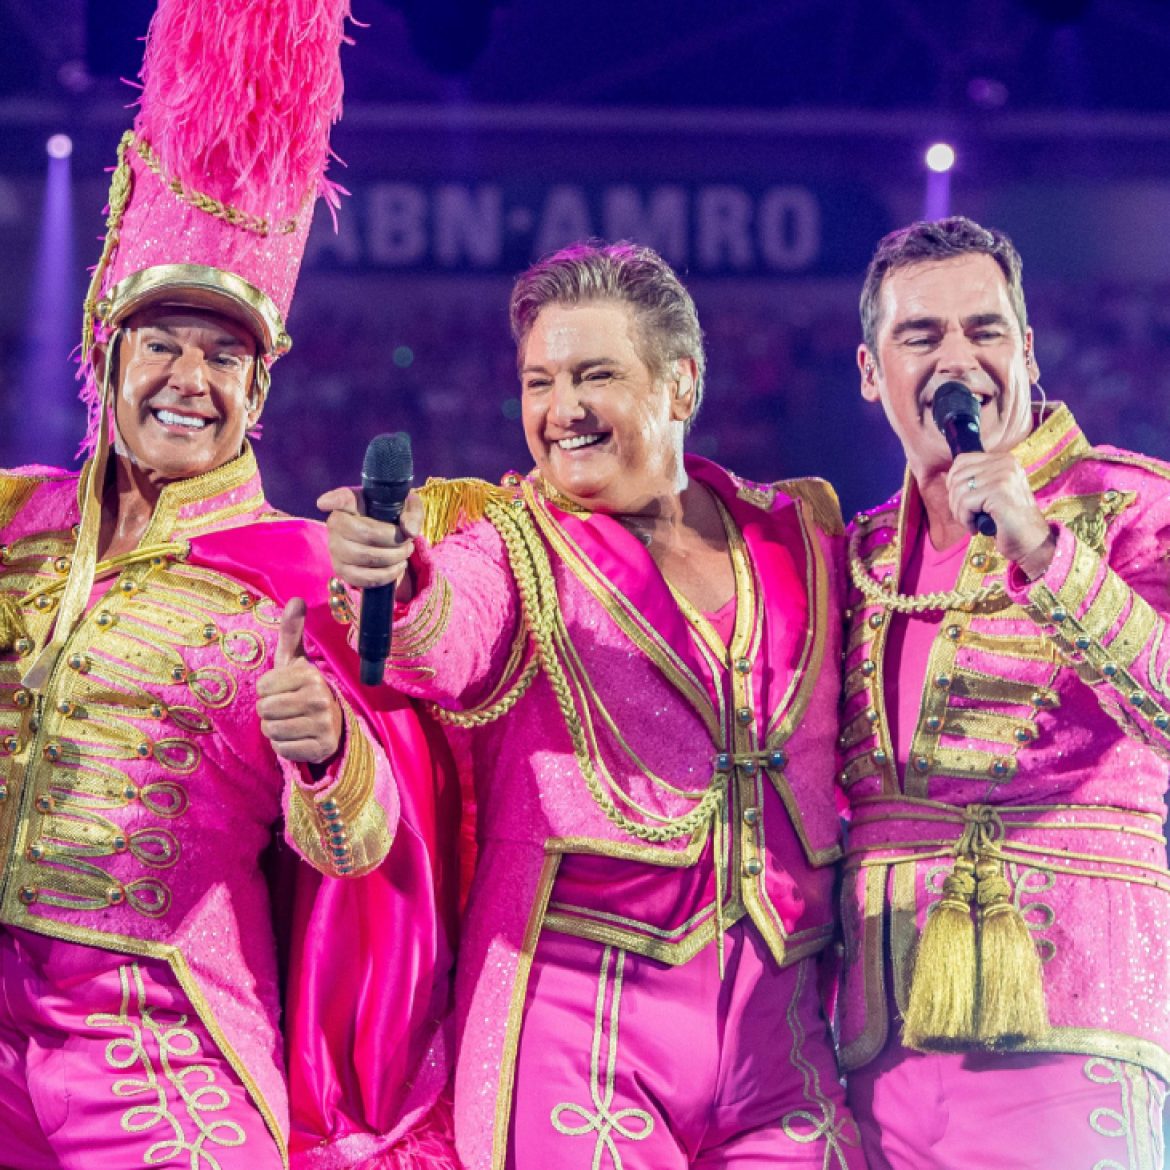 De Toppers in roze outfits